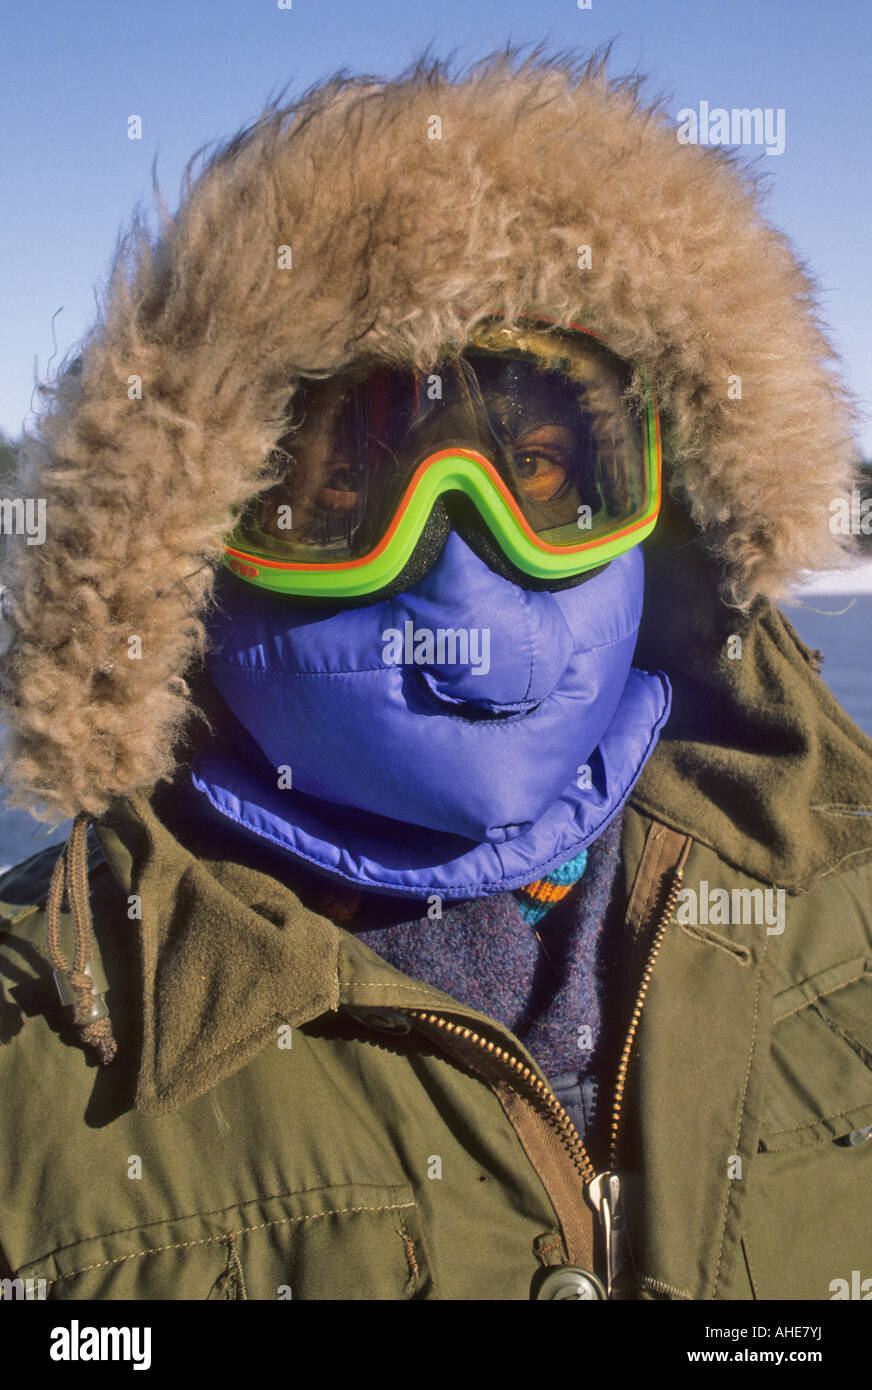 man-is-bundled-in-heavy-coat-with-fur-lined-hood-and-down-face-mask-AHE7YJ.jpg